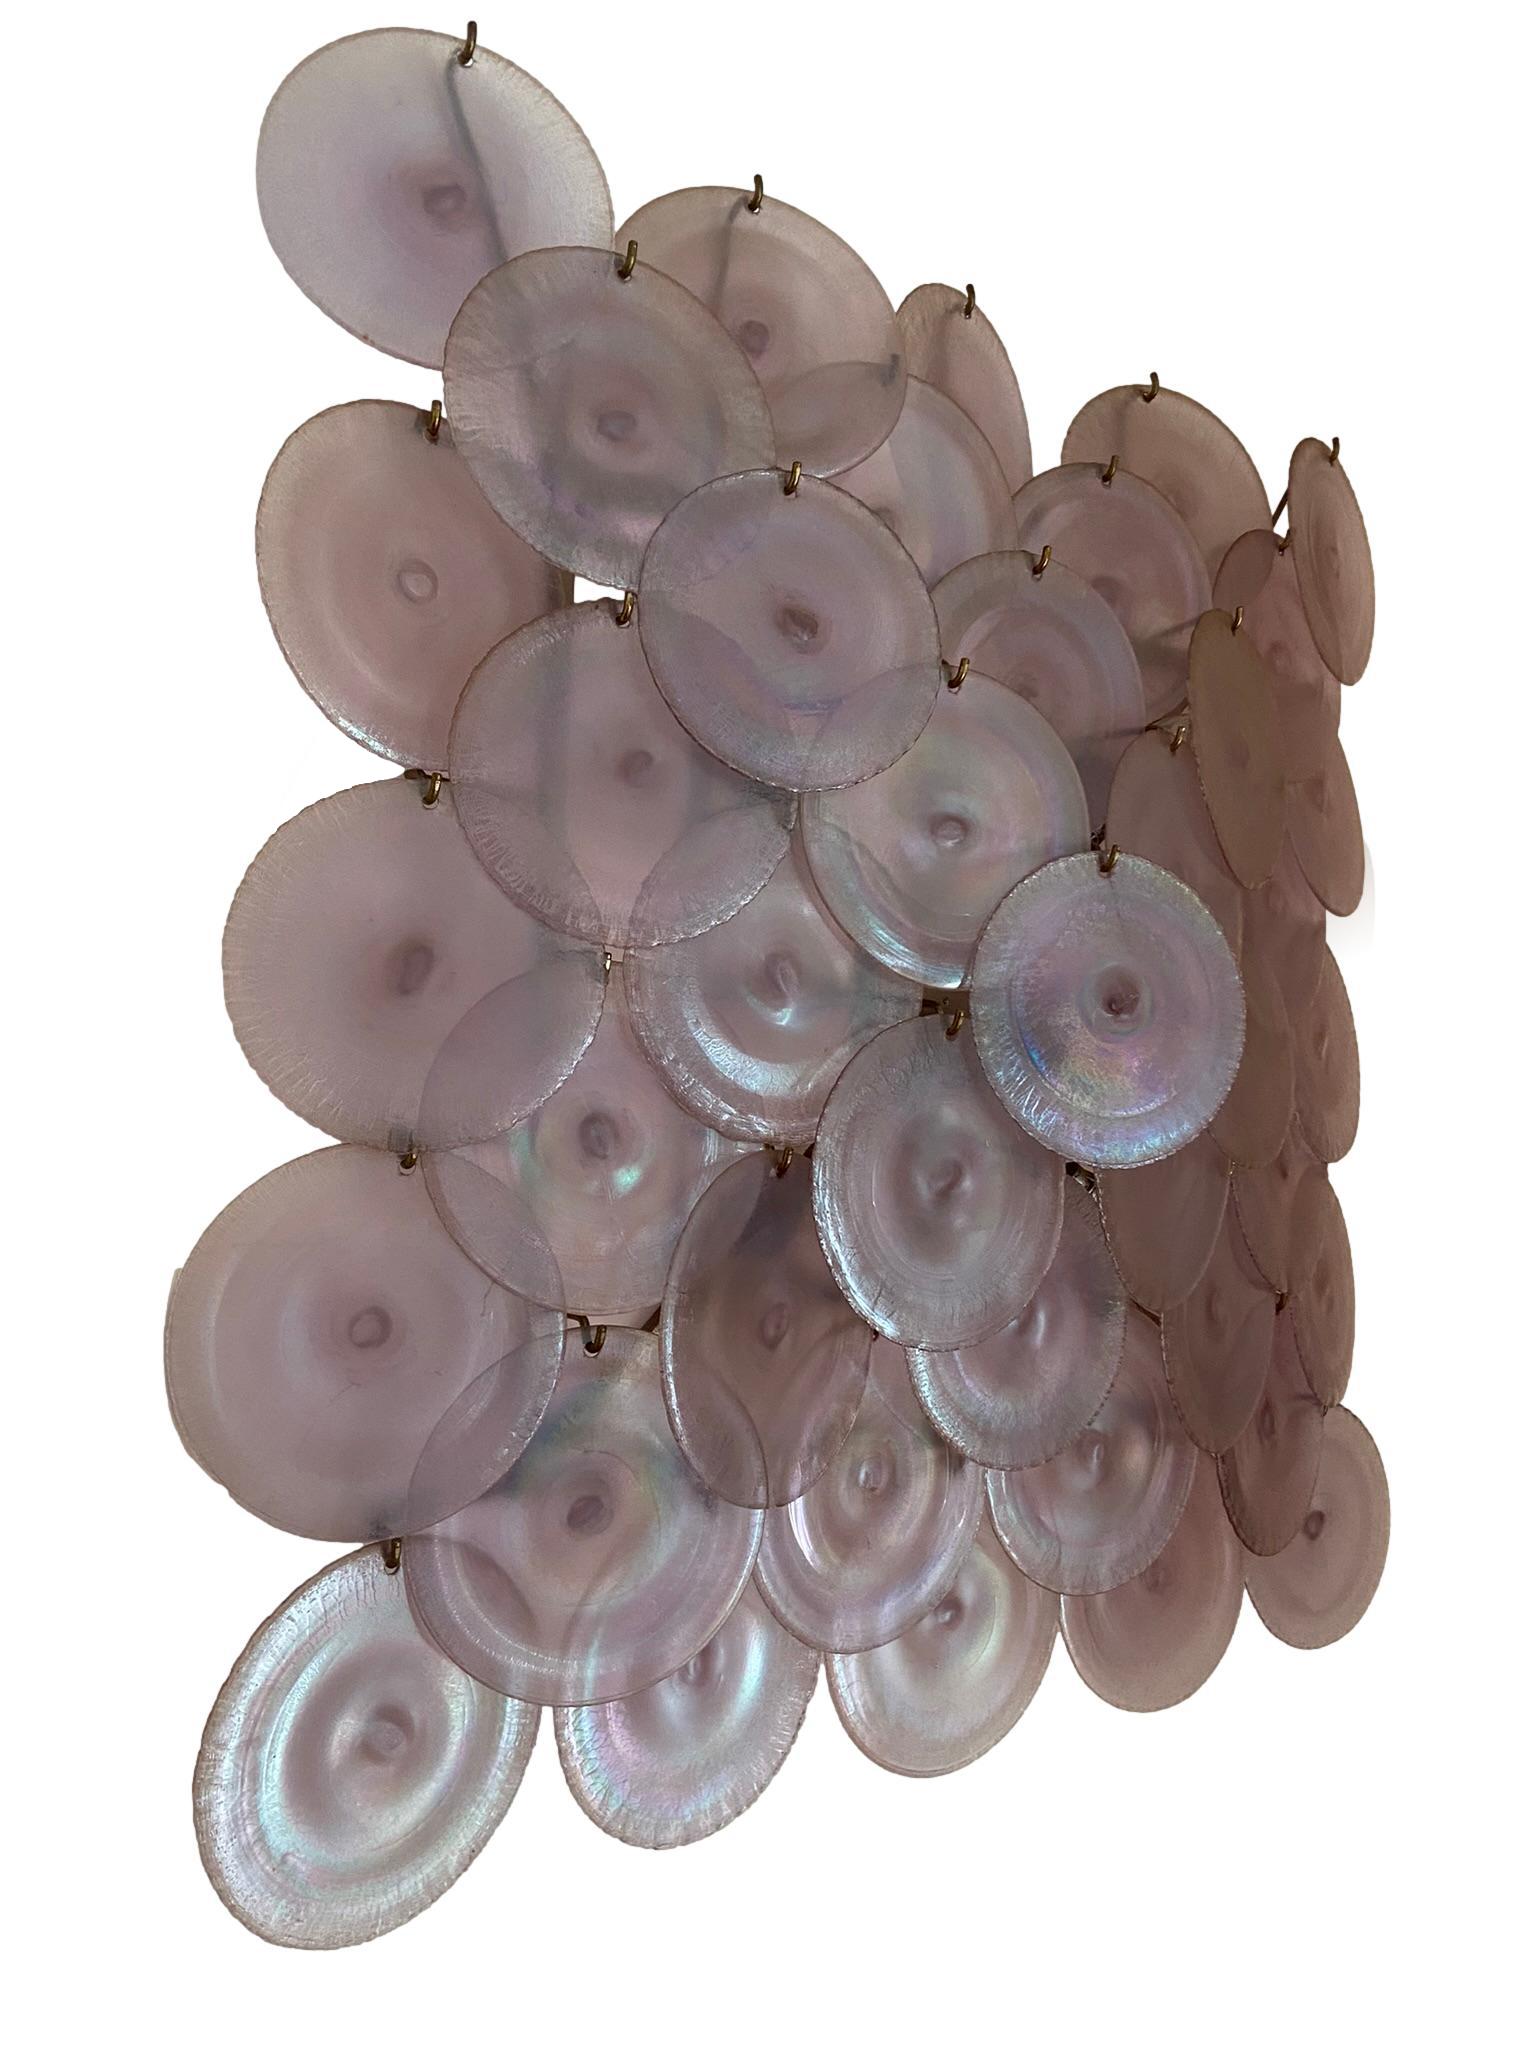 Large disc-shaped applique in irridescent Murano glass designed by Carlo Nason for Mazzega Murano, Italy 1960. The applique rests on a nickel-plated metal structure with five light sources.  Very good condition.  The glass, now impossible to find,